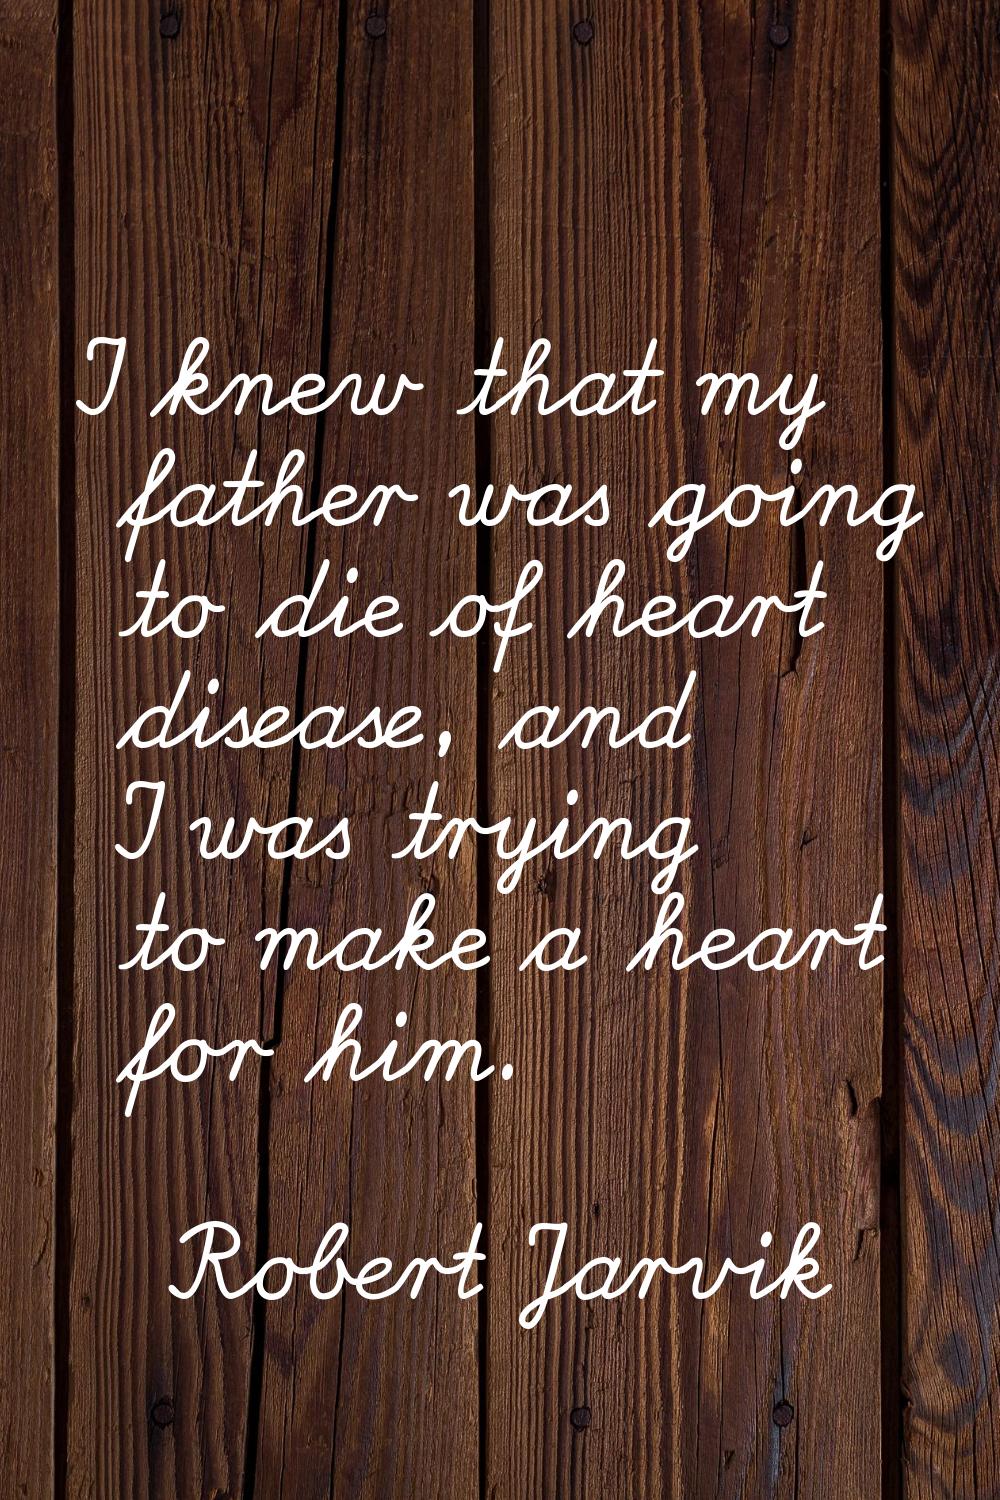 I knew that my father was going to die of heart disease, and I was trying to make a heart for him.